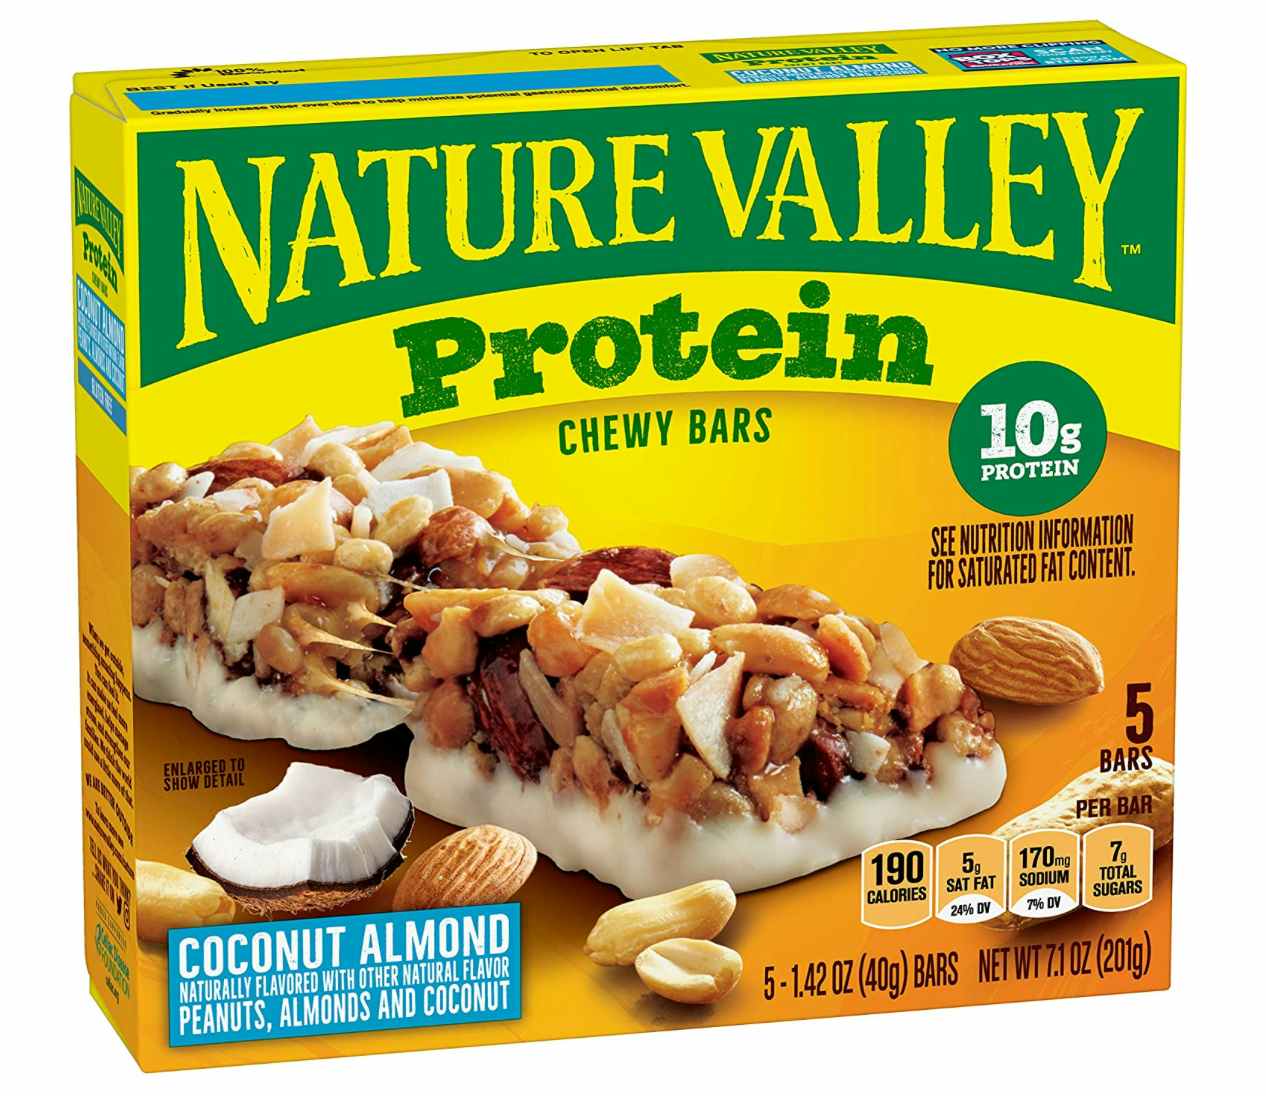 A box of nature valley bars